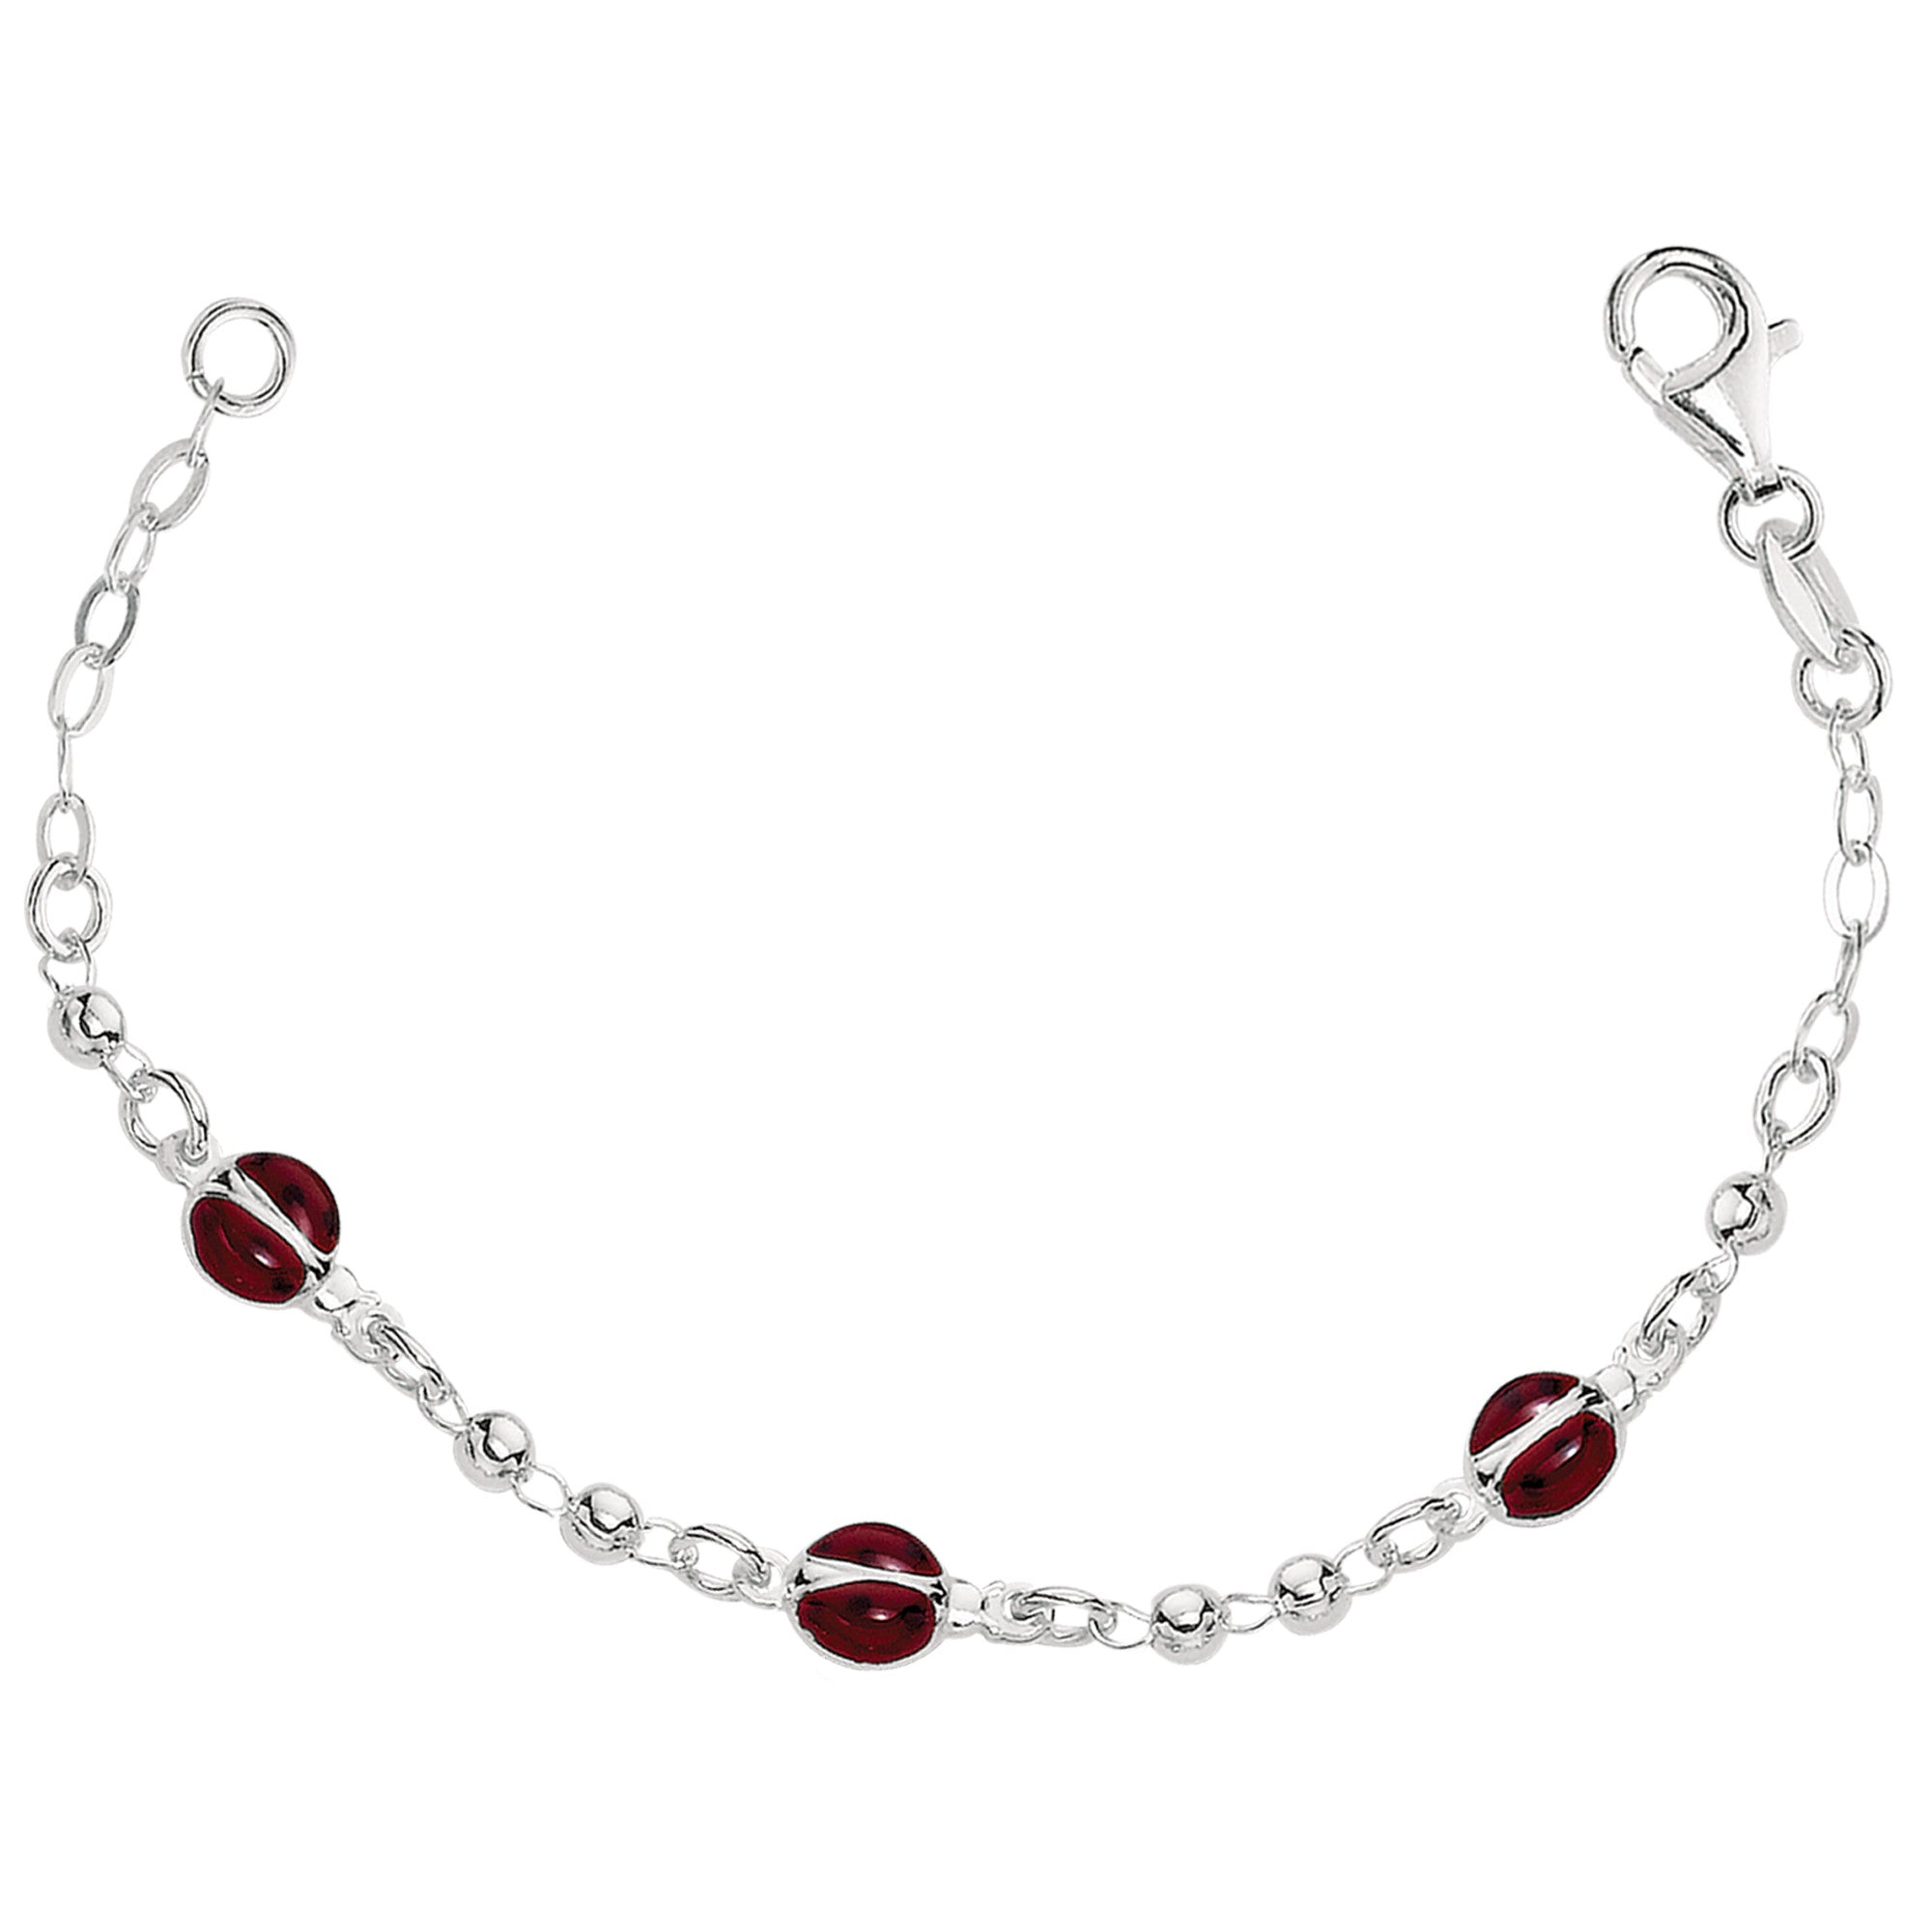 Baby Bracelet With Enameled Ladybug Charms In Sterling Silver - 6 Inches - JewelryAffairs
 - 1